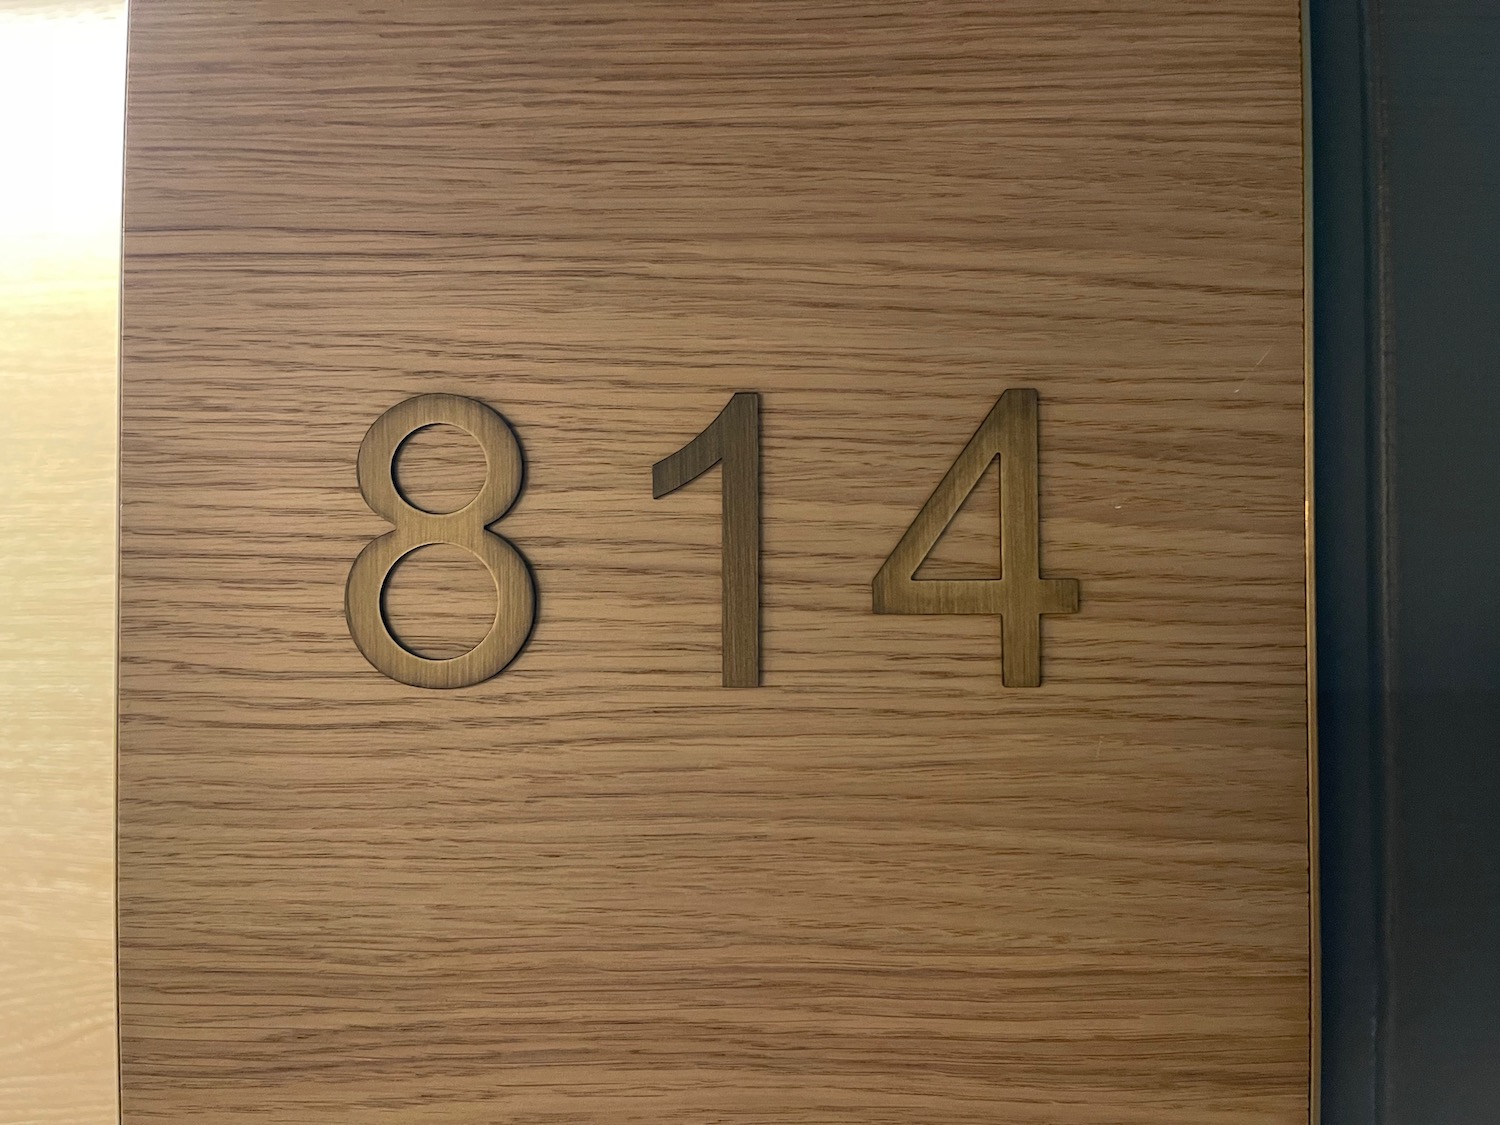 a number on a wood surface